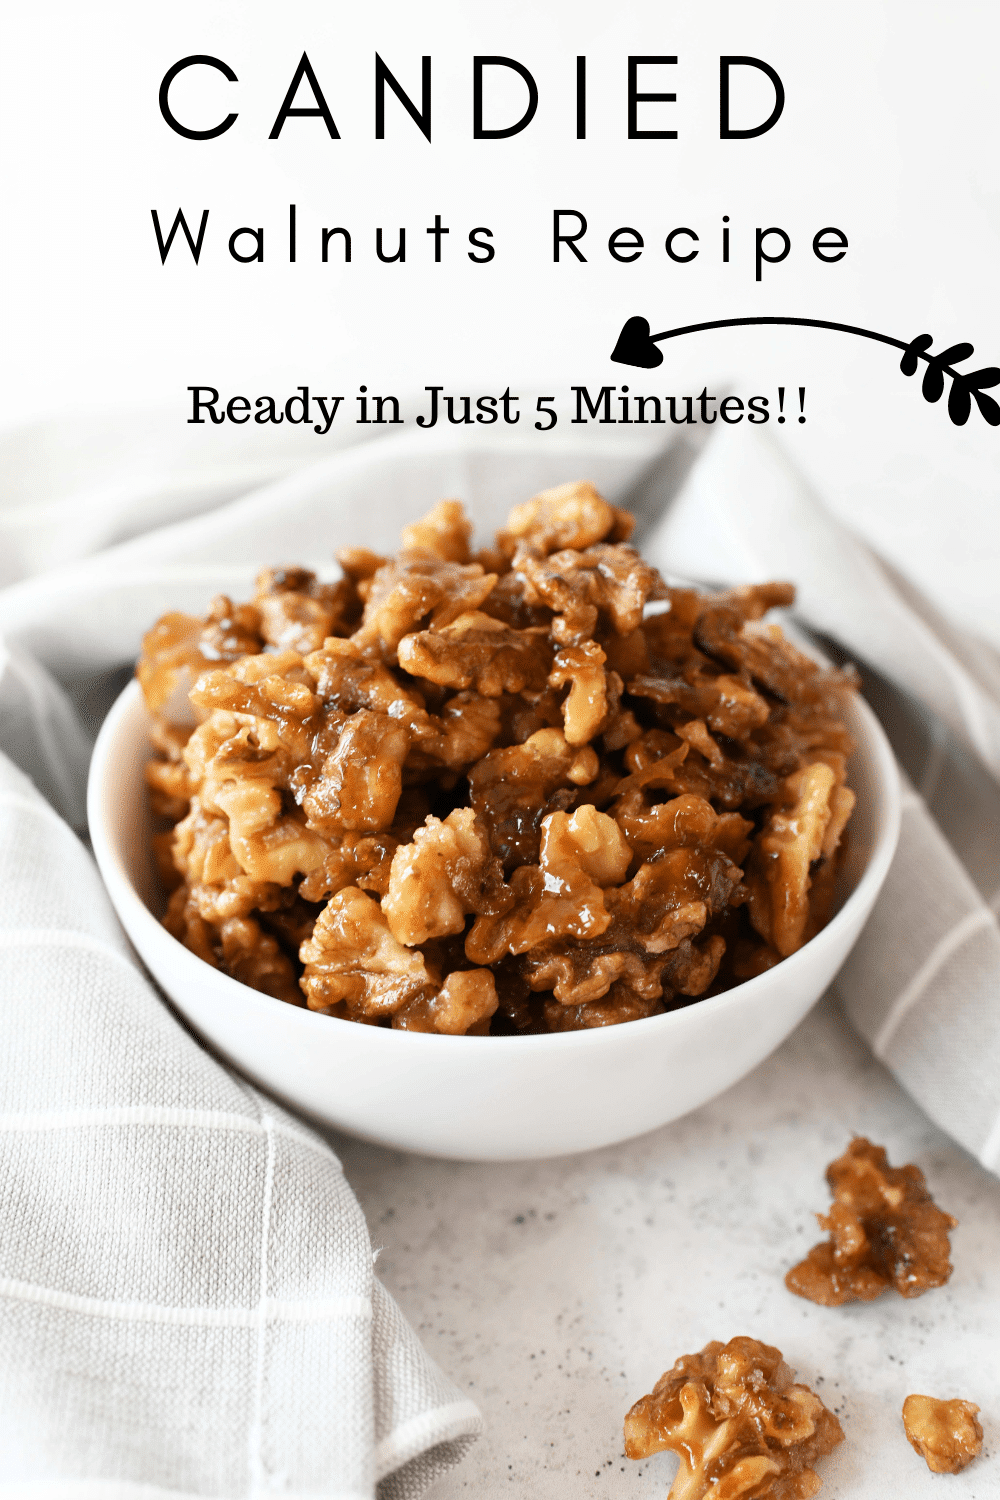 How to Make Candied Walnuts in 5 Minutes